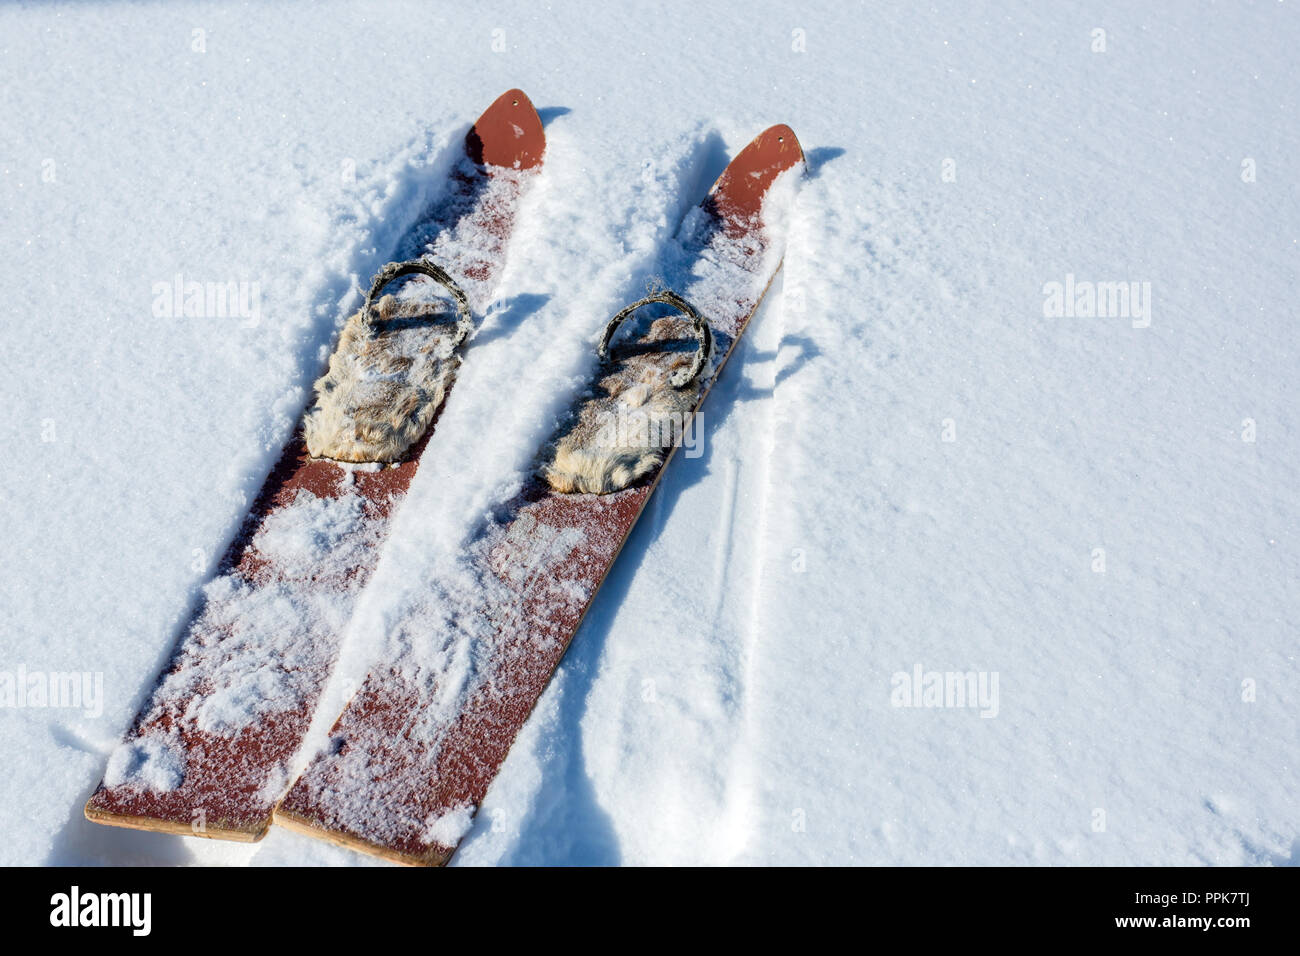 Pair of old fashioned wooden red skis on white snow Stock Photo - Alamy